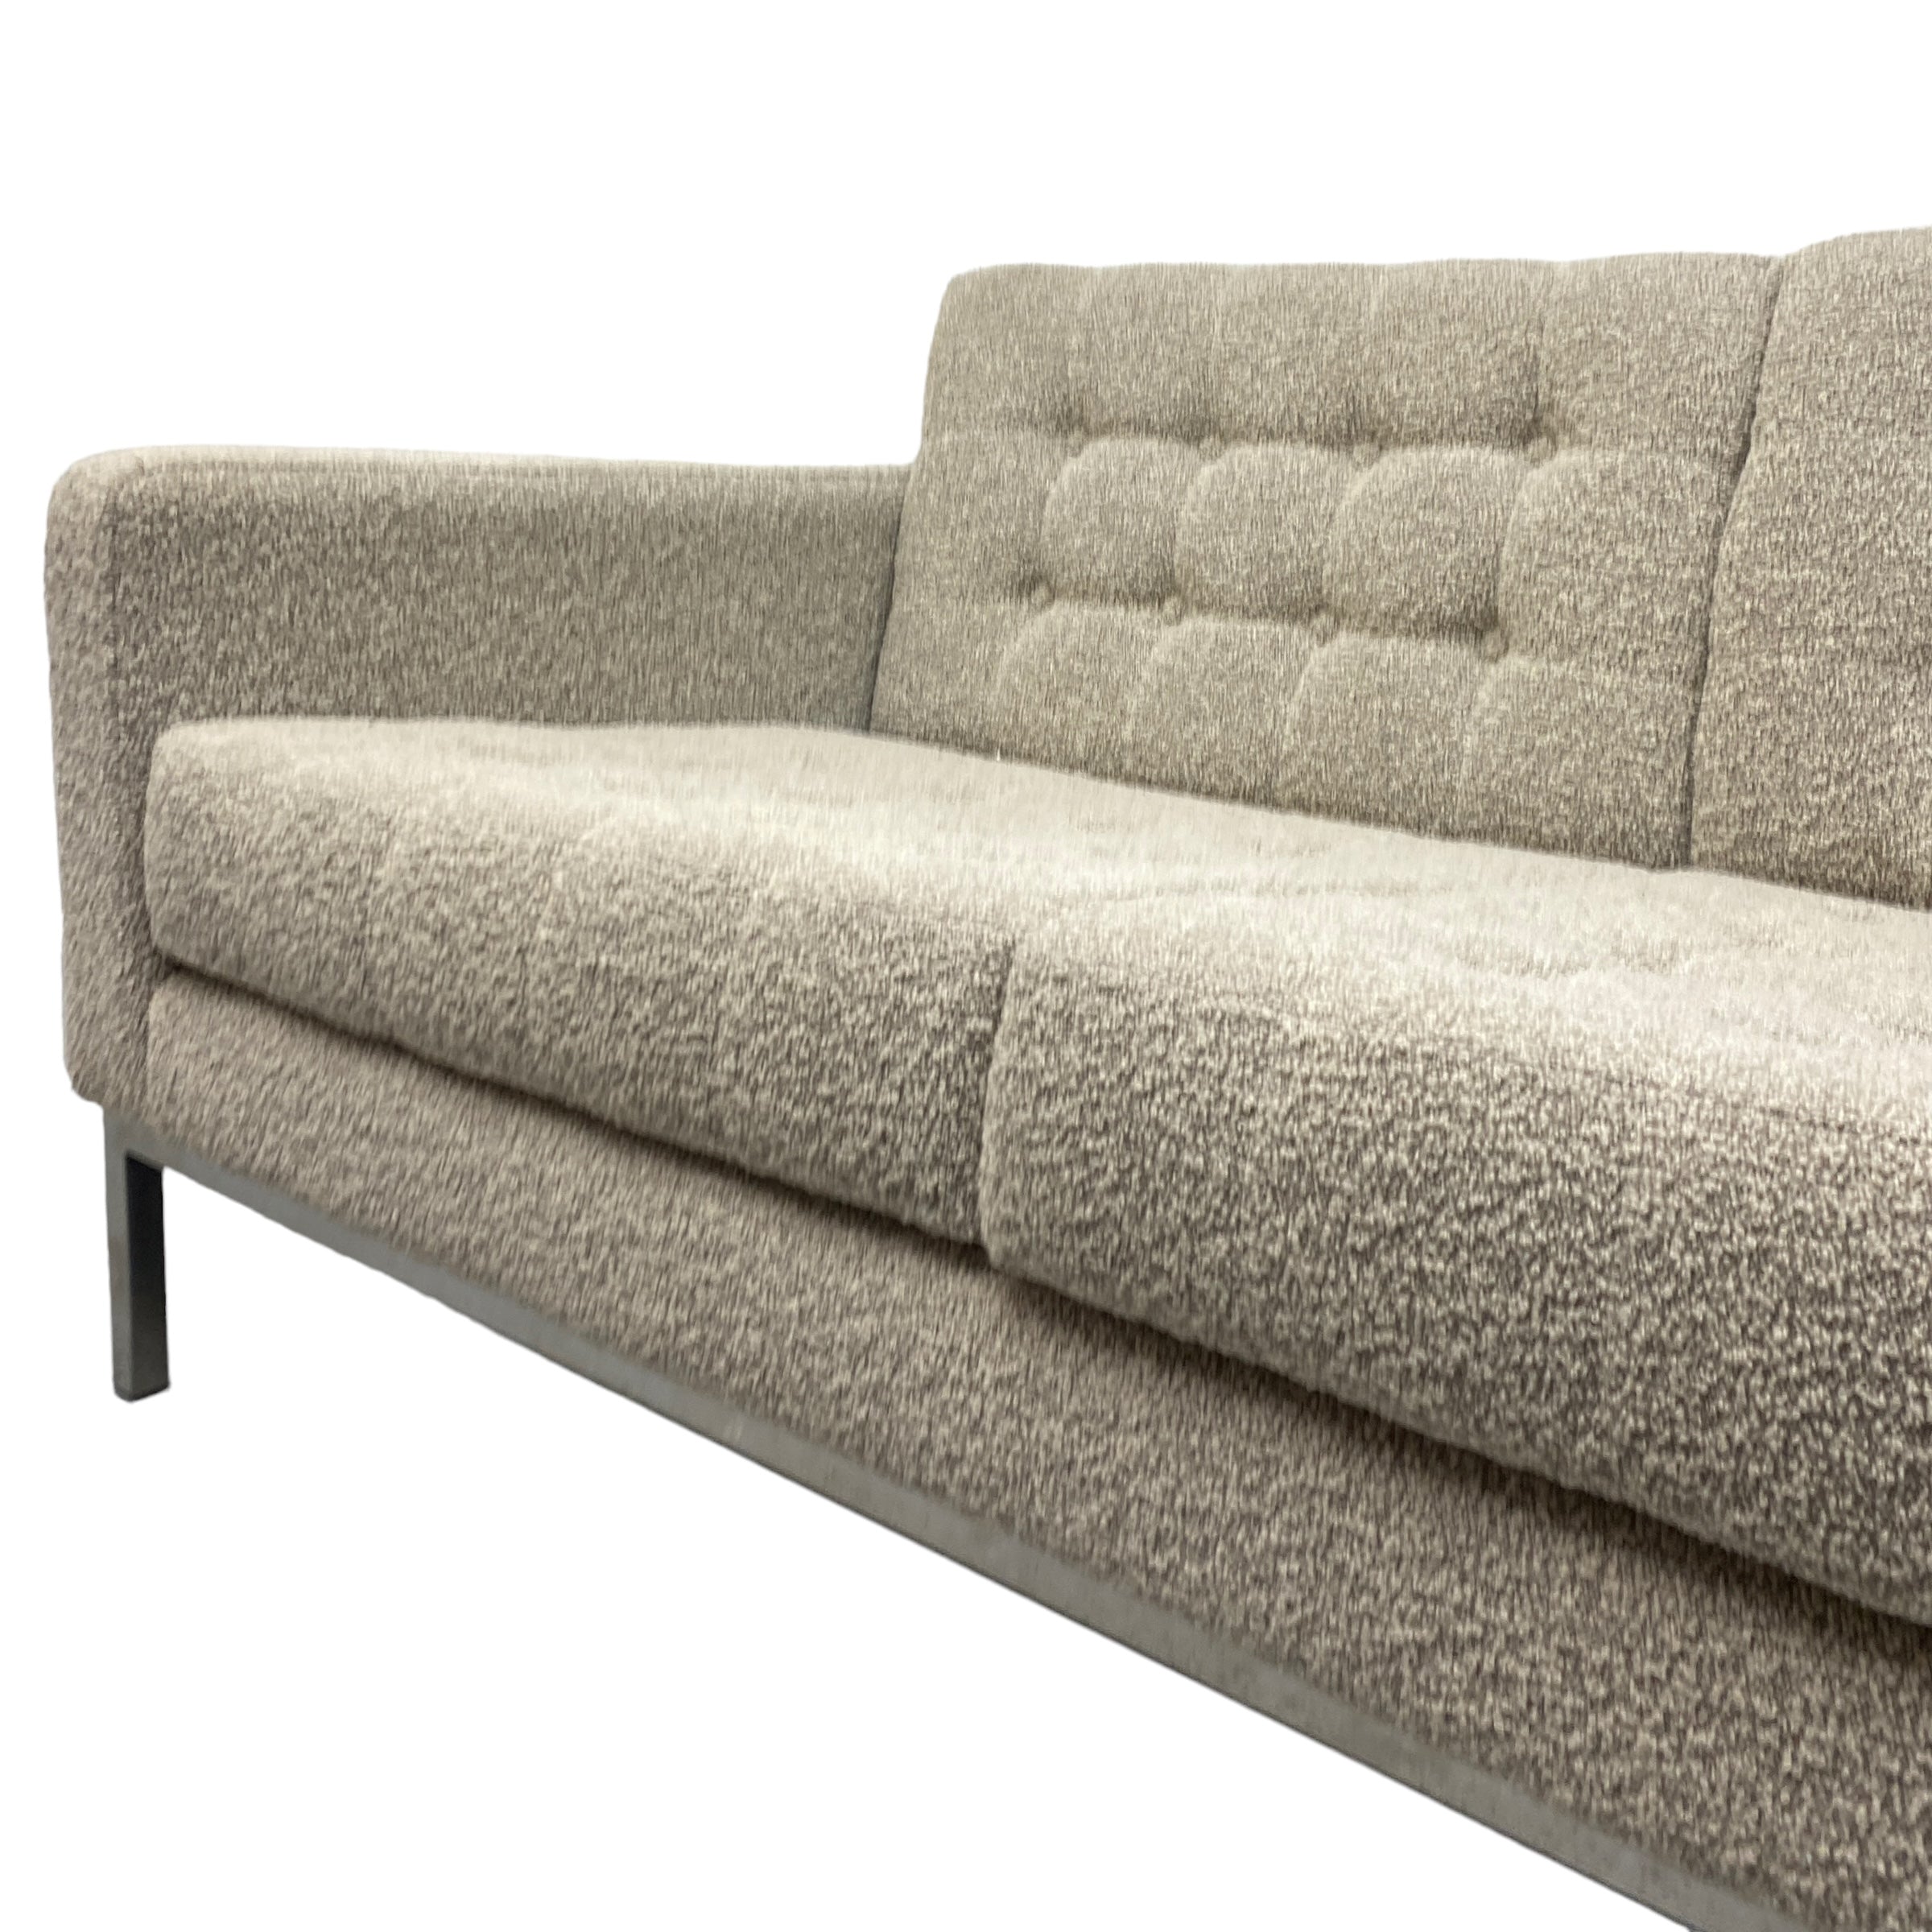 Wool Robin Day Sofa Midcentury Two Seater